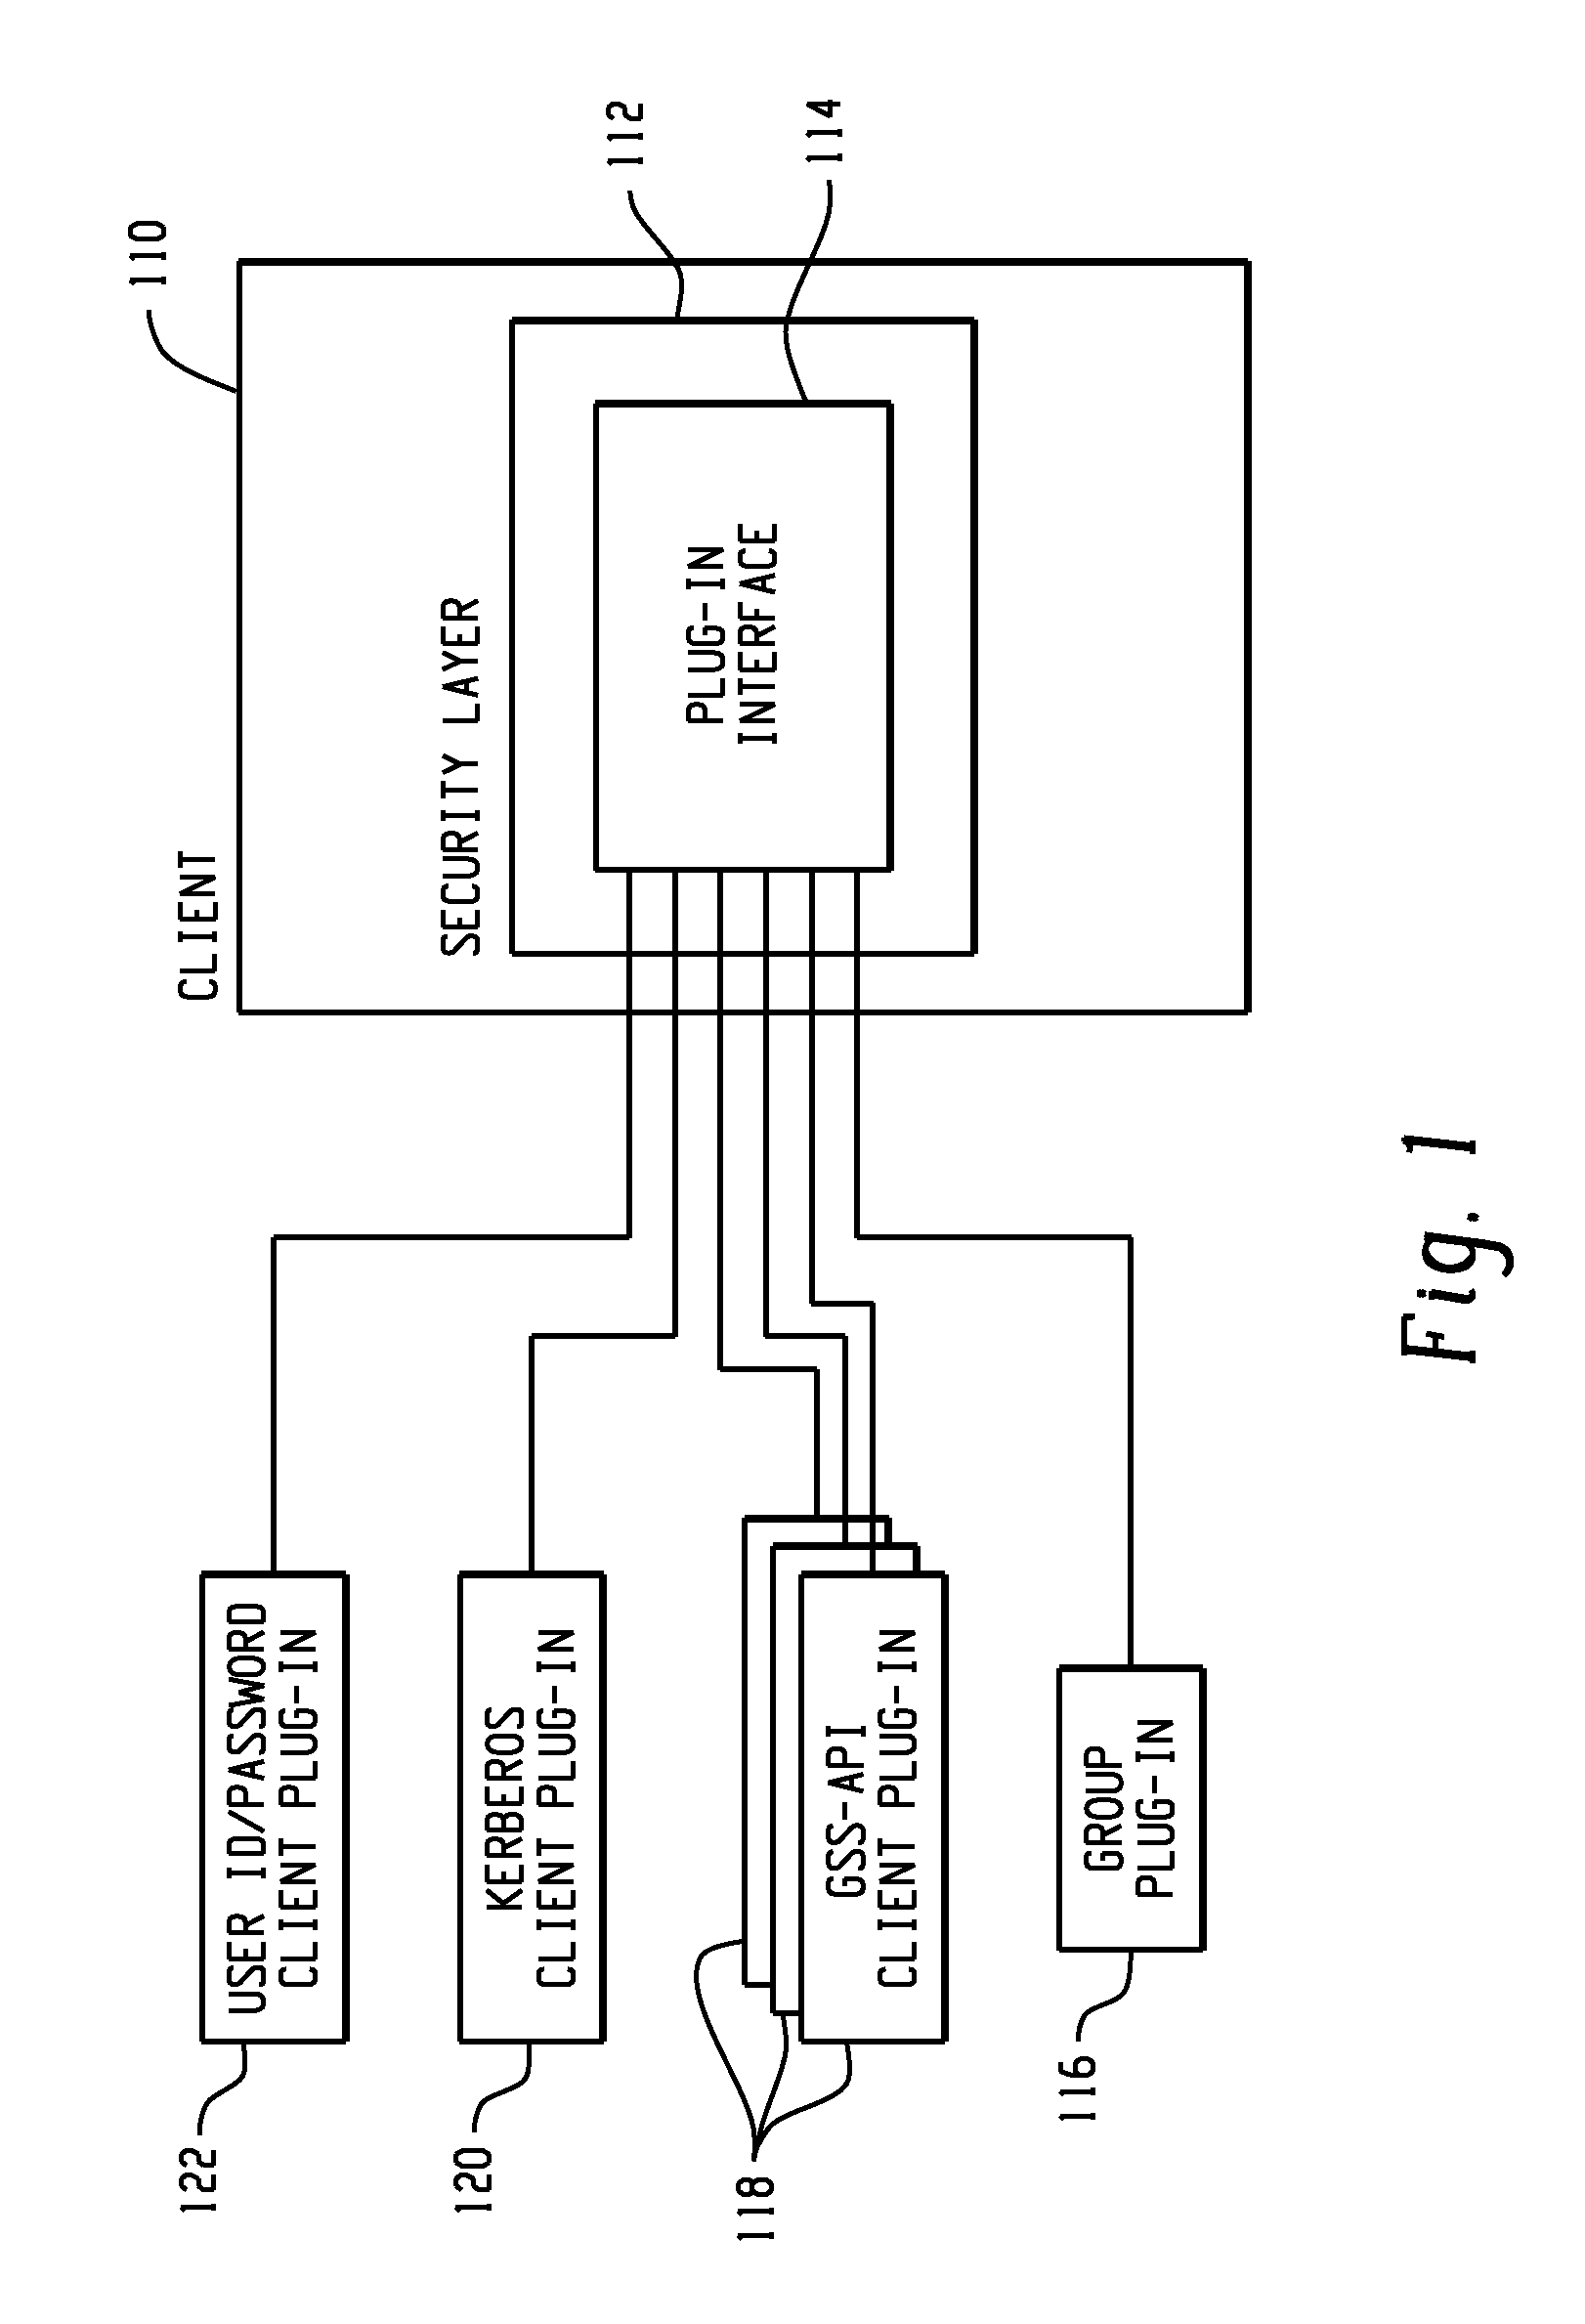 Authentication of user database access